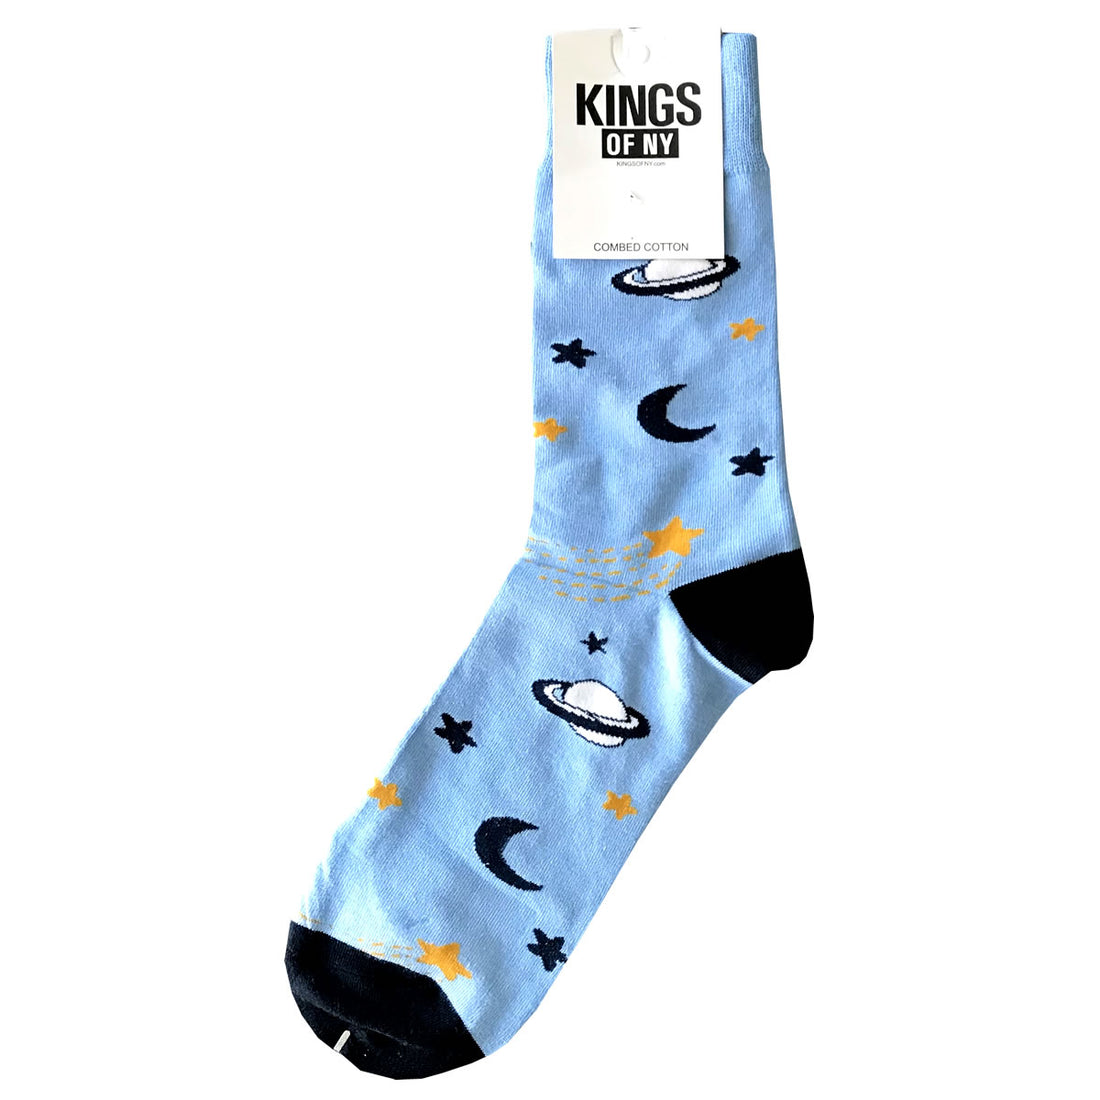 Light Blue Outerspace Galaxy Mens Cotton Socks by KINGS OF NY